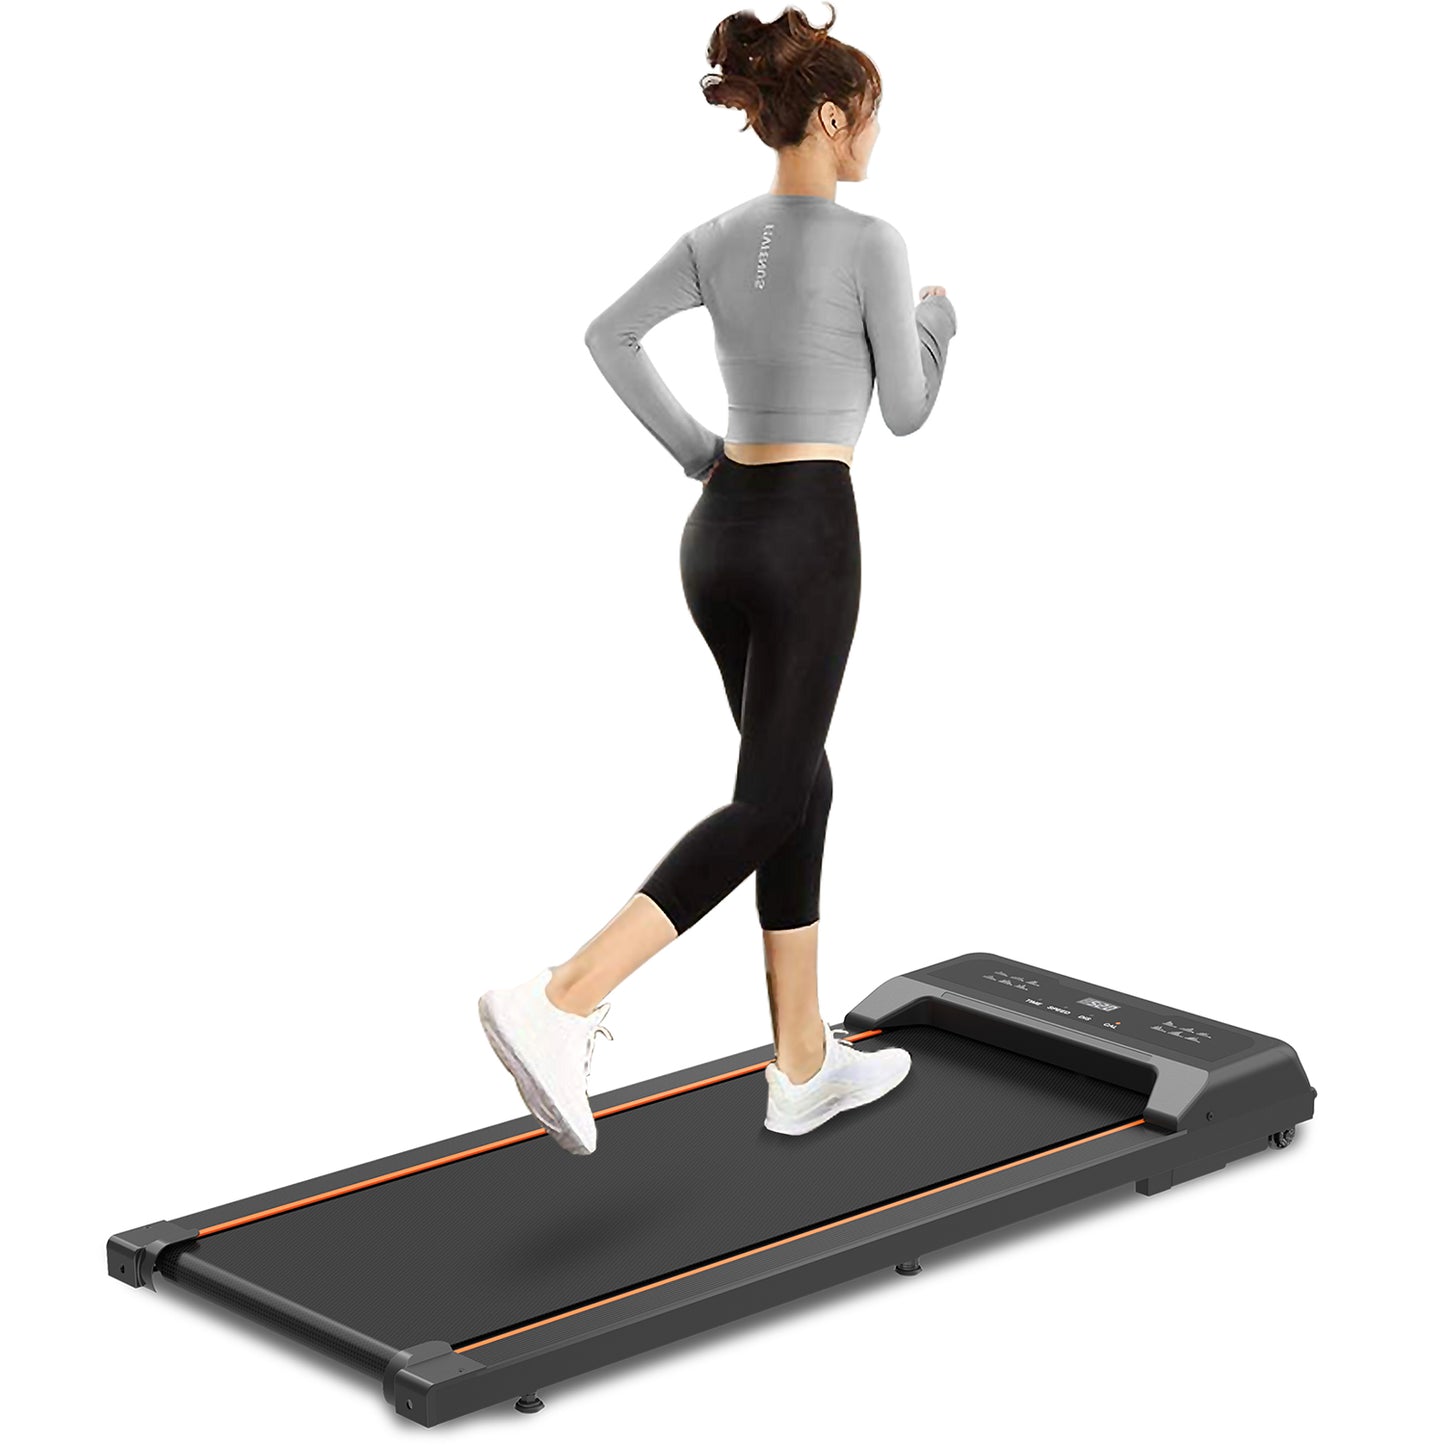 Walking Pad Under Desk Treadmill, LED Display and Remote Control Portable Treadmill for Home and Office, 2.5HP 265LBS